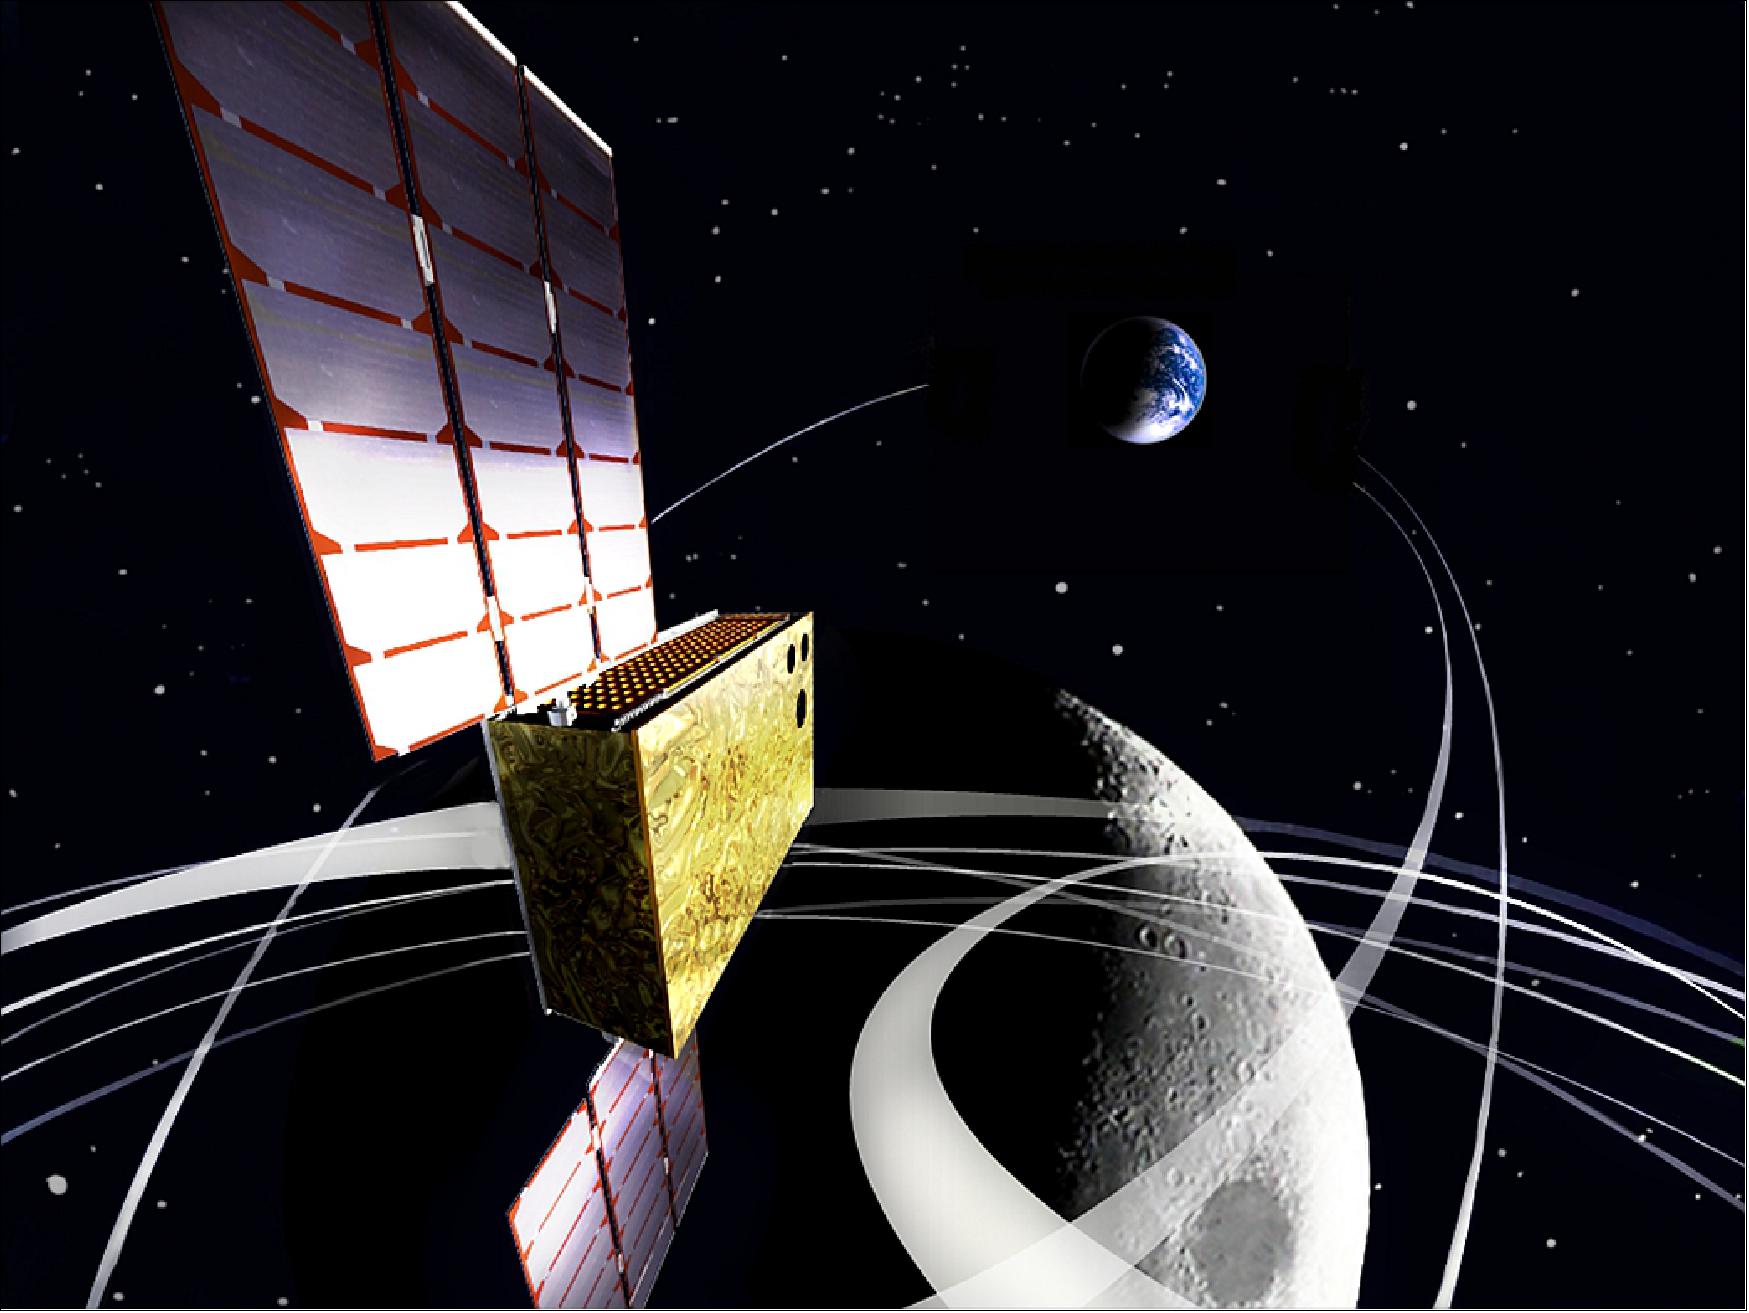 Figure 1: EQUULEUS will measure the distribution of plasma that surrounds the Earth to help scientists understand the radiation environment in the region of space around Earth. It will also demonstrate low-energy trajectory control techniques, such as multiple lunar flybys, within the Earth-Moon region (image credit: JAXA/University of Tokyo)